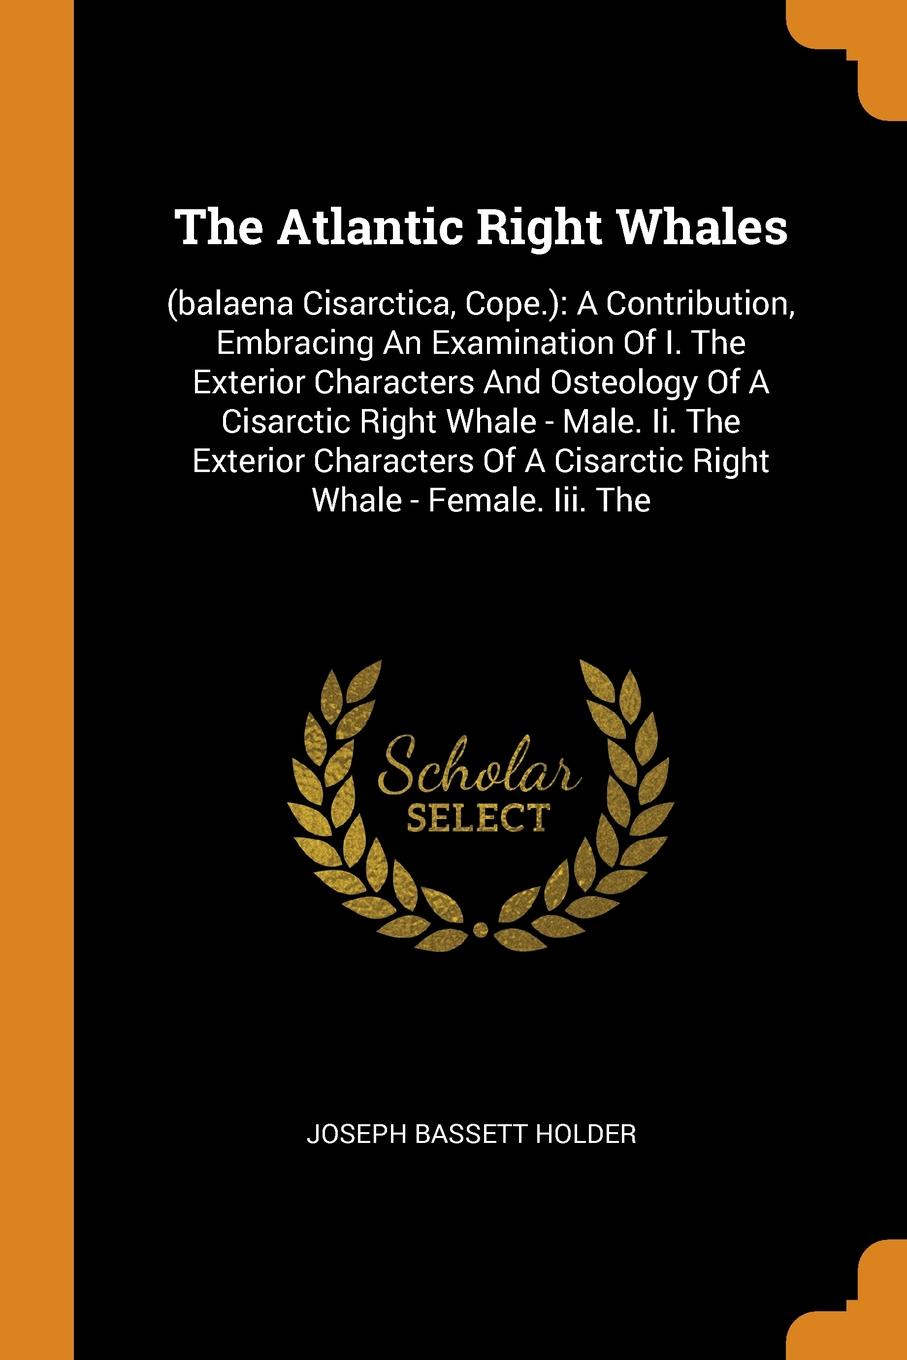 The Atlantic Right Whales. (balaena Cisarctica, Cope.): A Contribution, Embracing An Examination Of I. The Exterior Characters And Osteology Of A Cisarctic Right Whale - Male. Ii. The Exterior Characters Of A Cisarctic Right Whale - Female. Iii. The